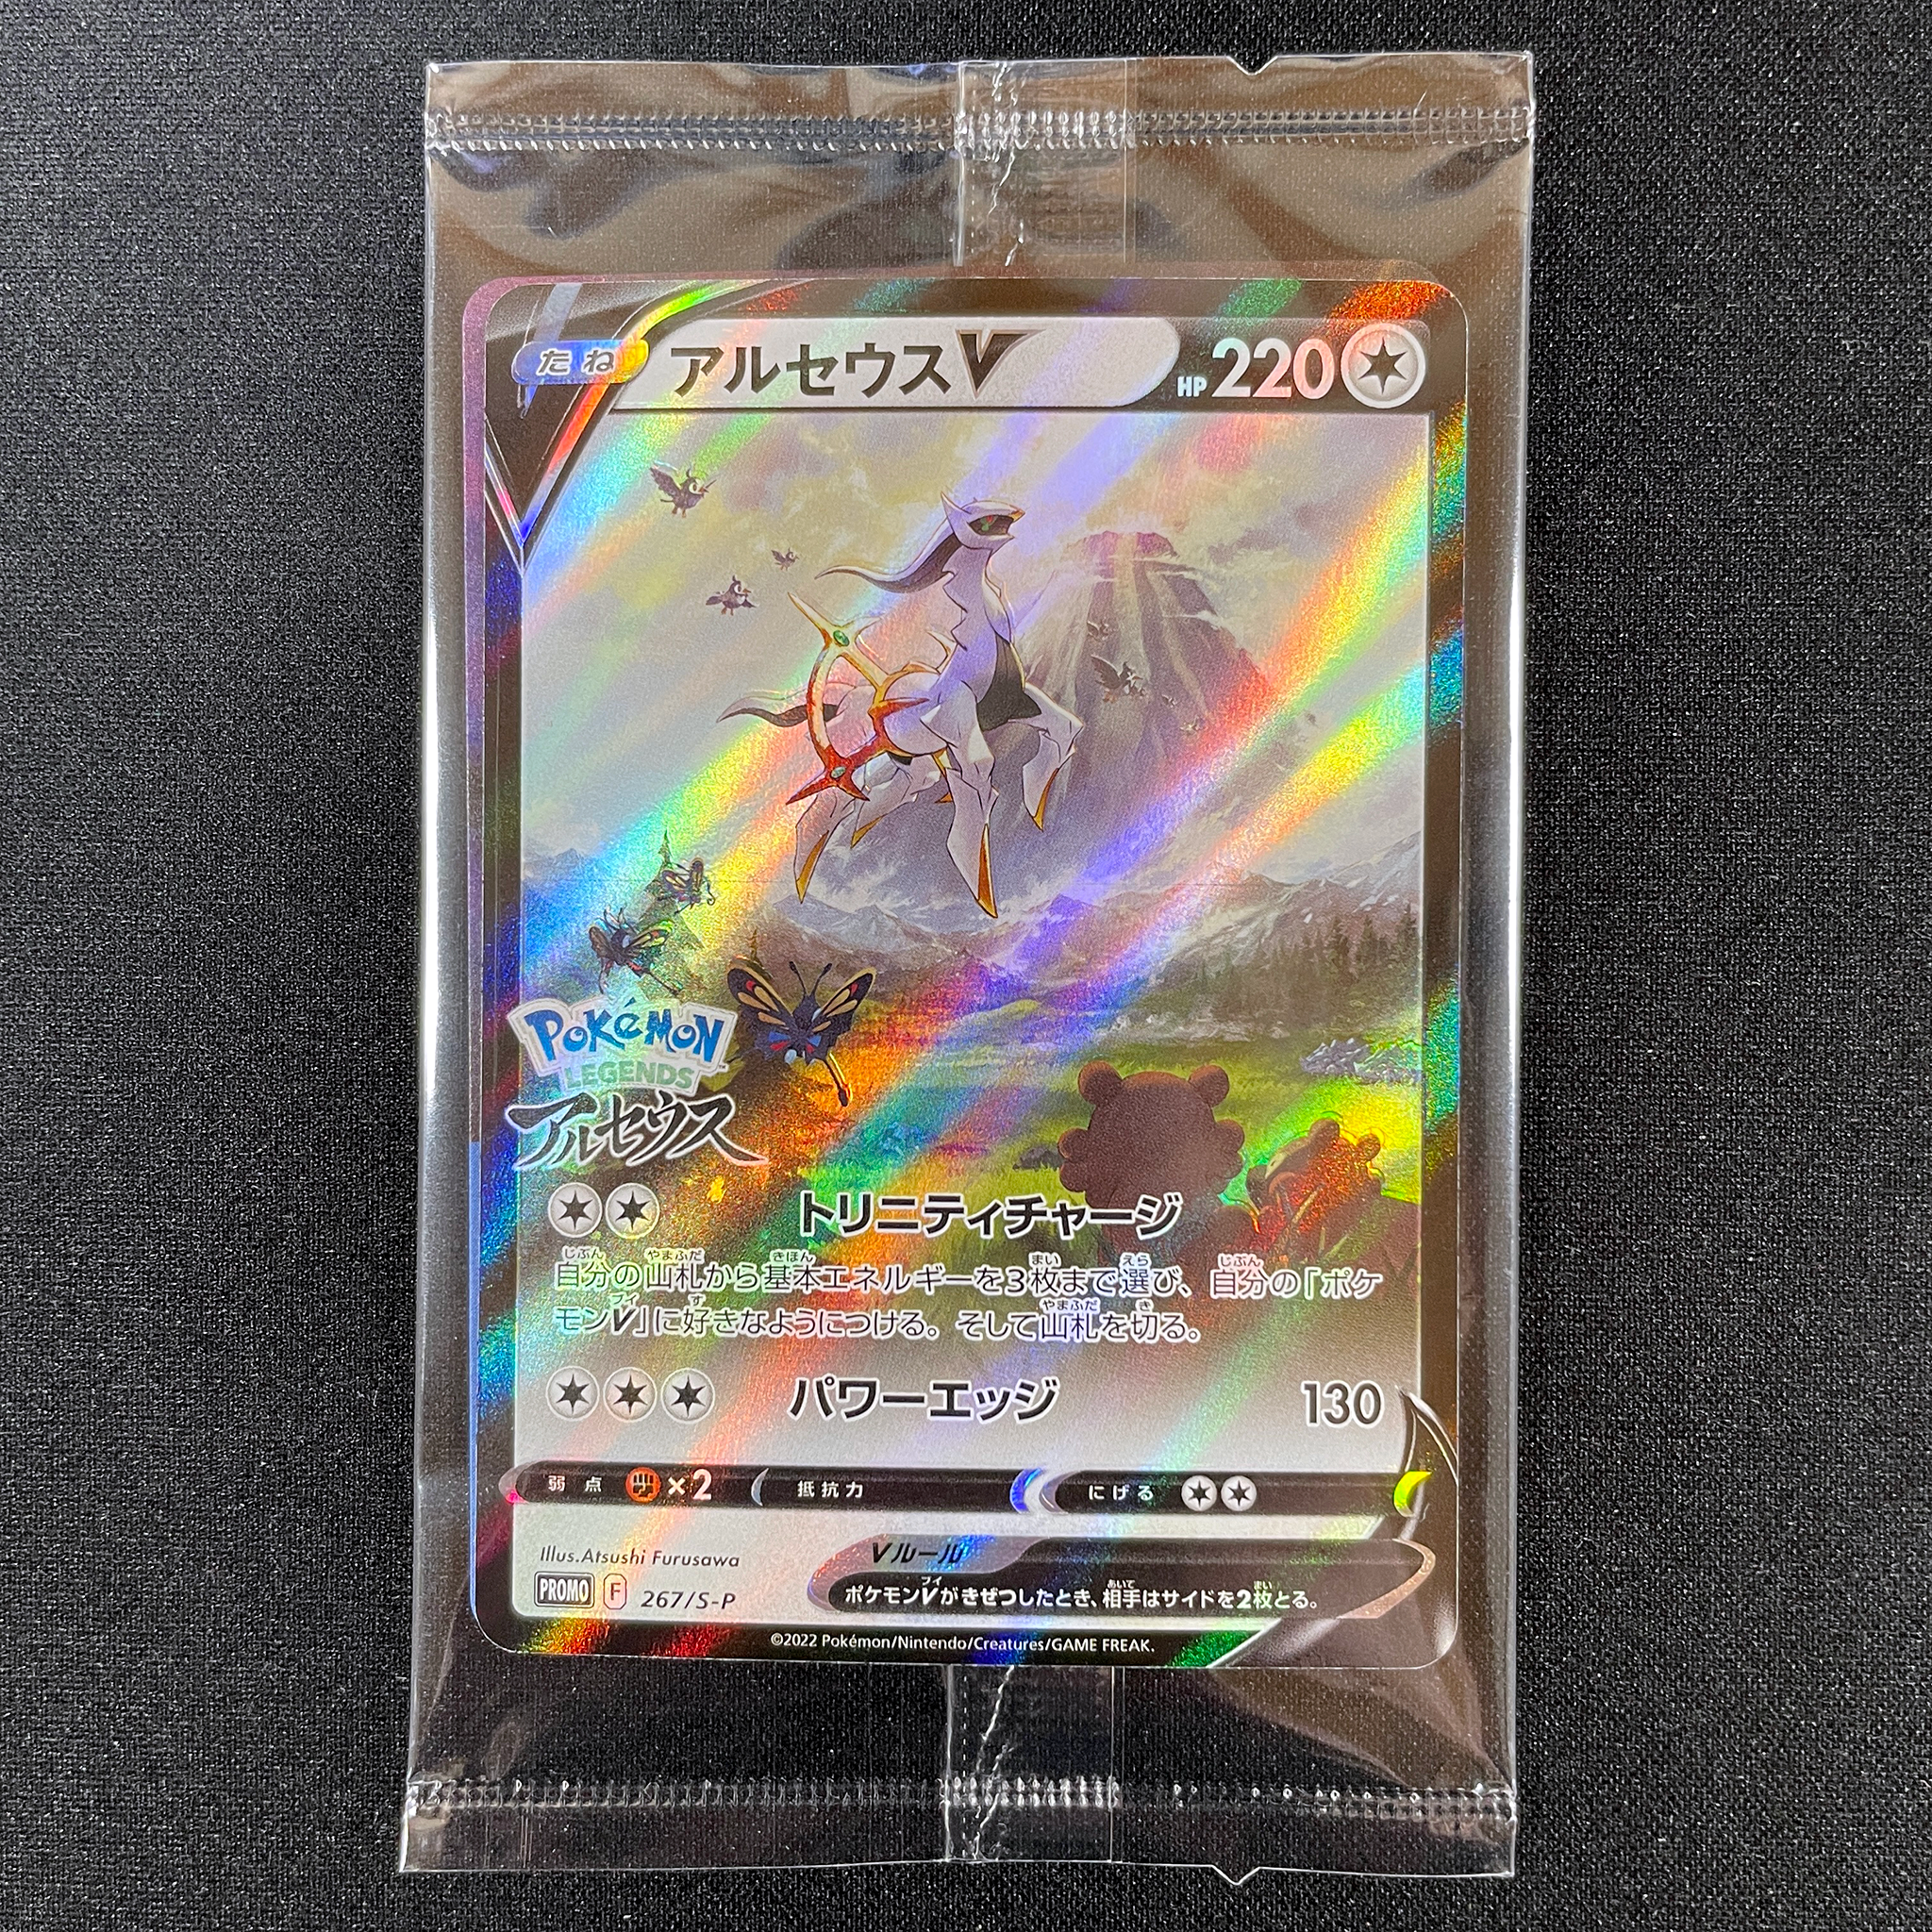 Pokémon Card Game Sword & Shield PROMO 267/S-P in blister  Arceus V  Release date: January 28 2022  Context of the card: Preorder bonus for the preorder of the Pokémon LEGENDS Arceus soft game on NINTENDO SWITCH